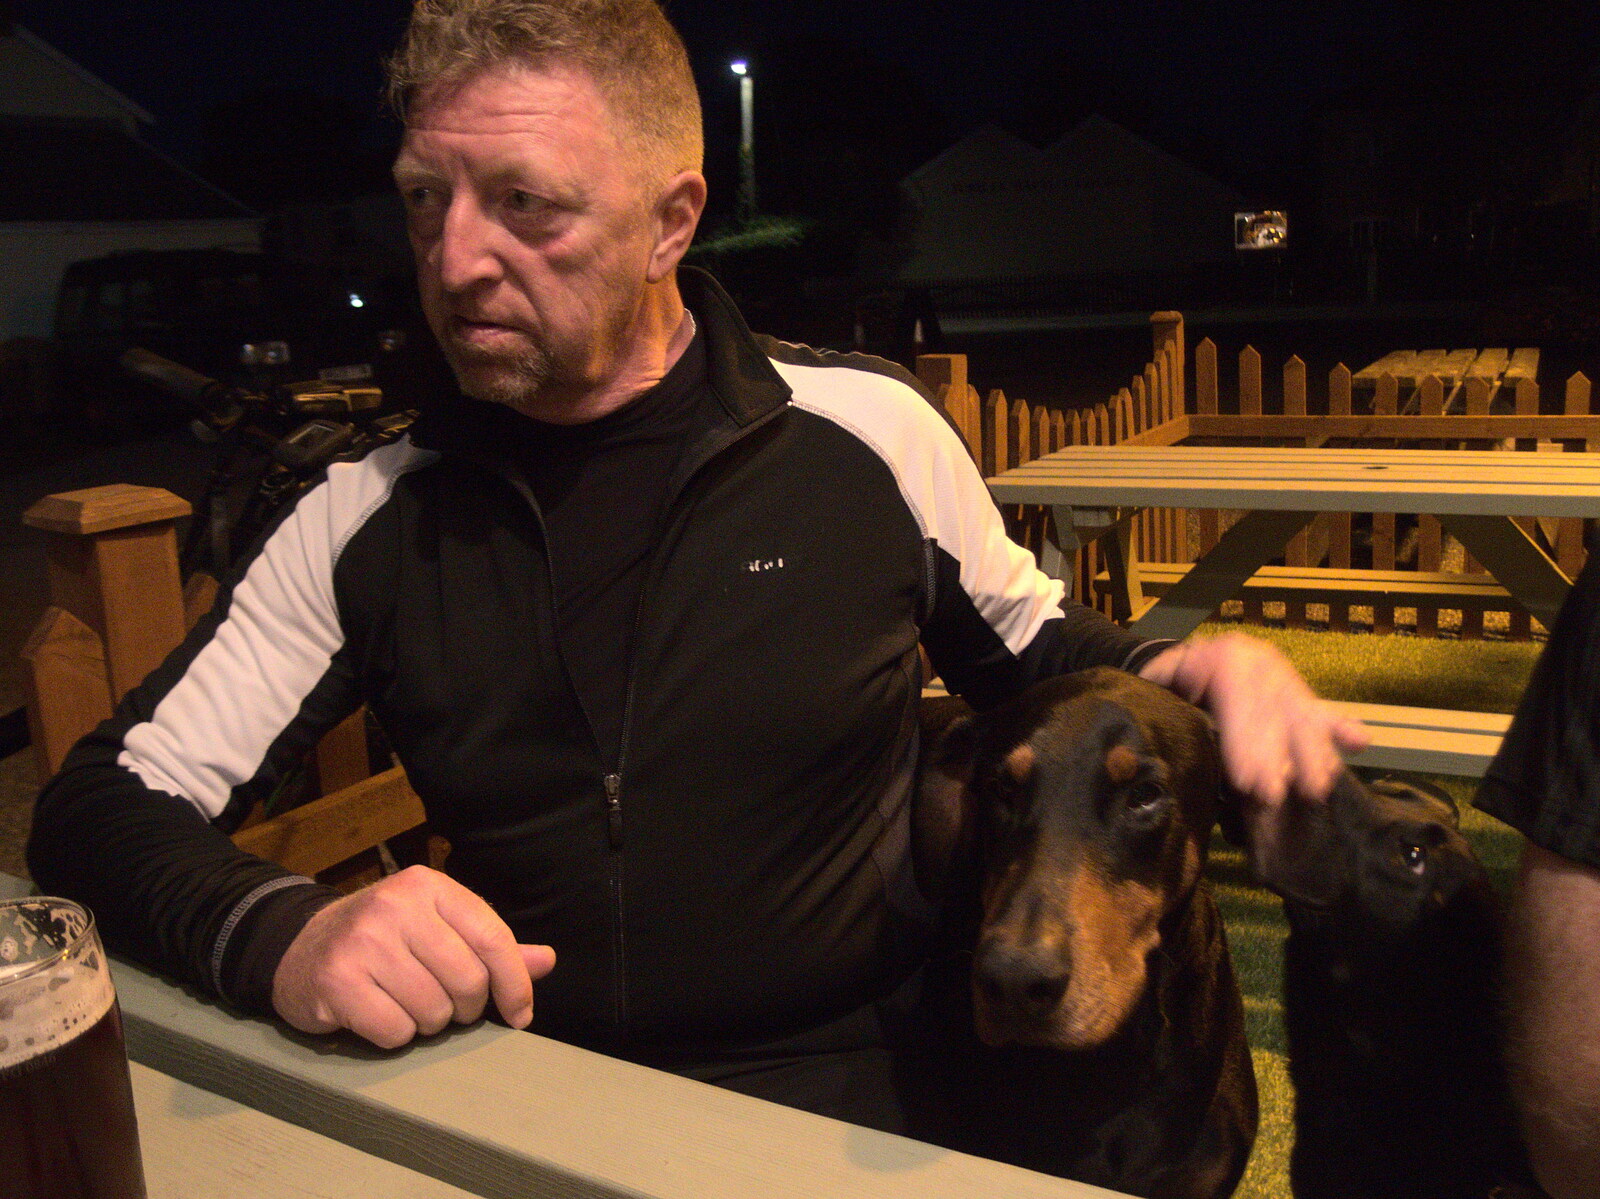 The Last Weavers Ever, Market Hill, Diss, Norfolk - 10th September 2021: Gaz says hello to a friendly Doberman